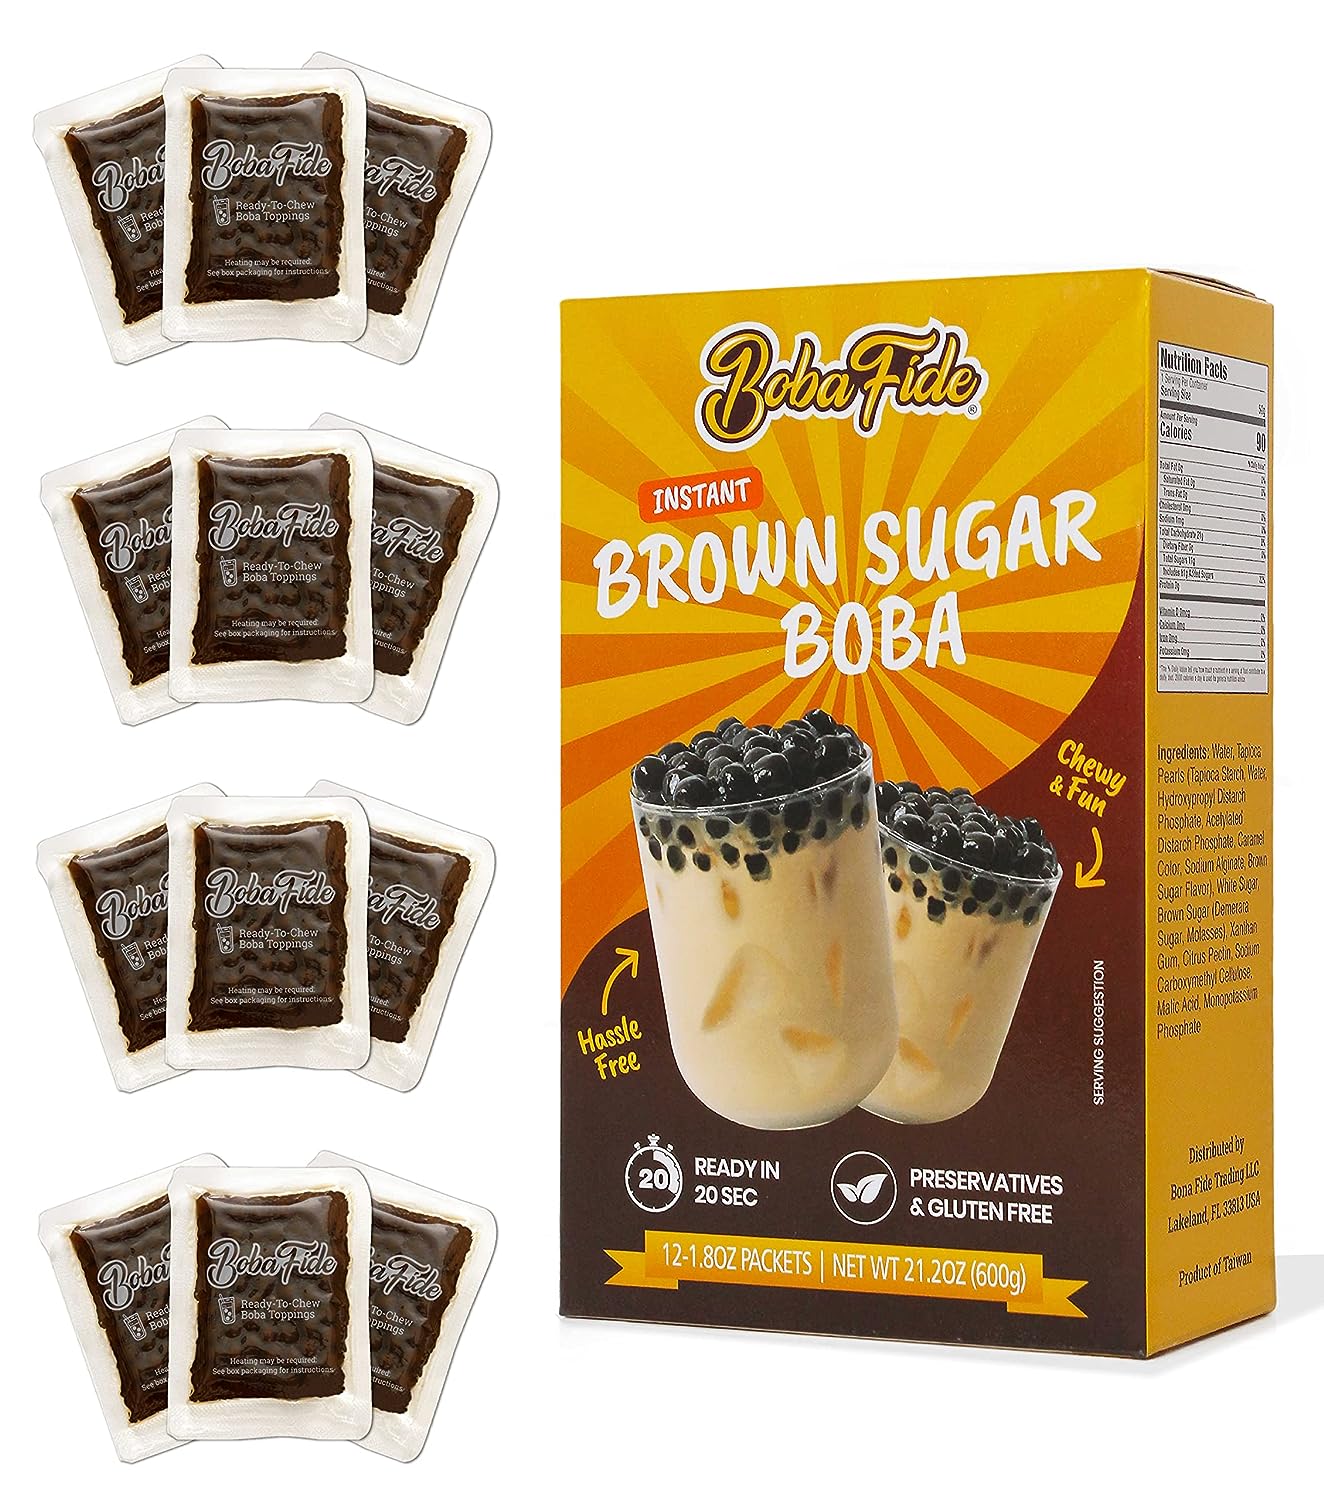 BOBA FIDE Instant Brown Sugar Boba Tapioca Pearls, 12 Packets of Microwavable Black Tapioca Pearls for Boba Bubble Milk Tea Kit, Ready in 25 Seconds, No Corn Syrup, Preservatives & Gluten Free, Vegan